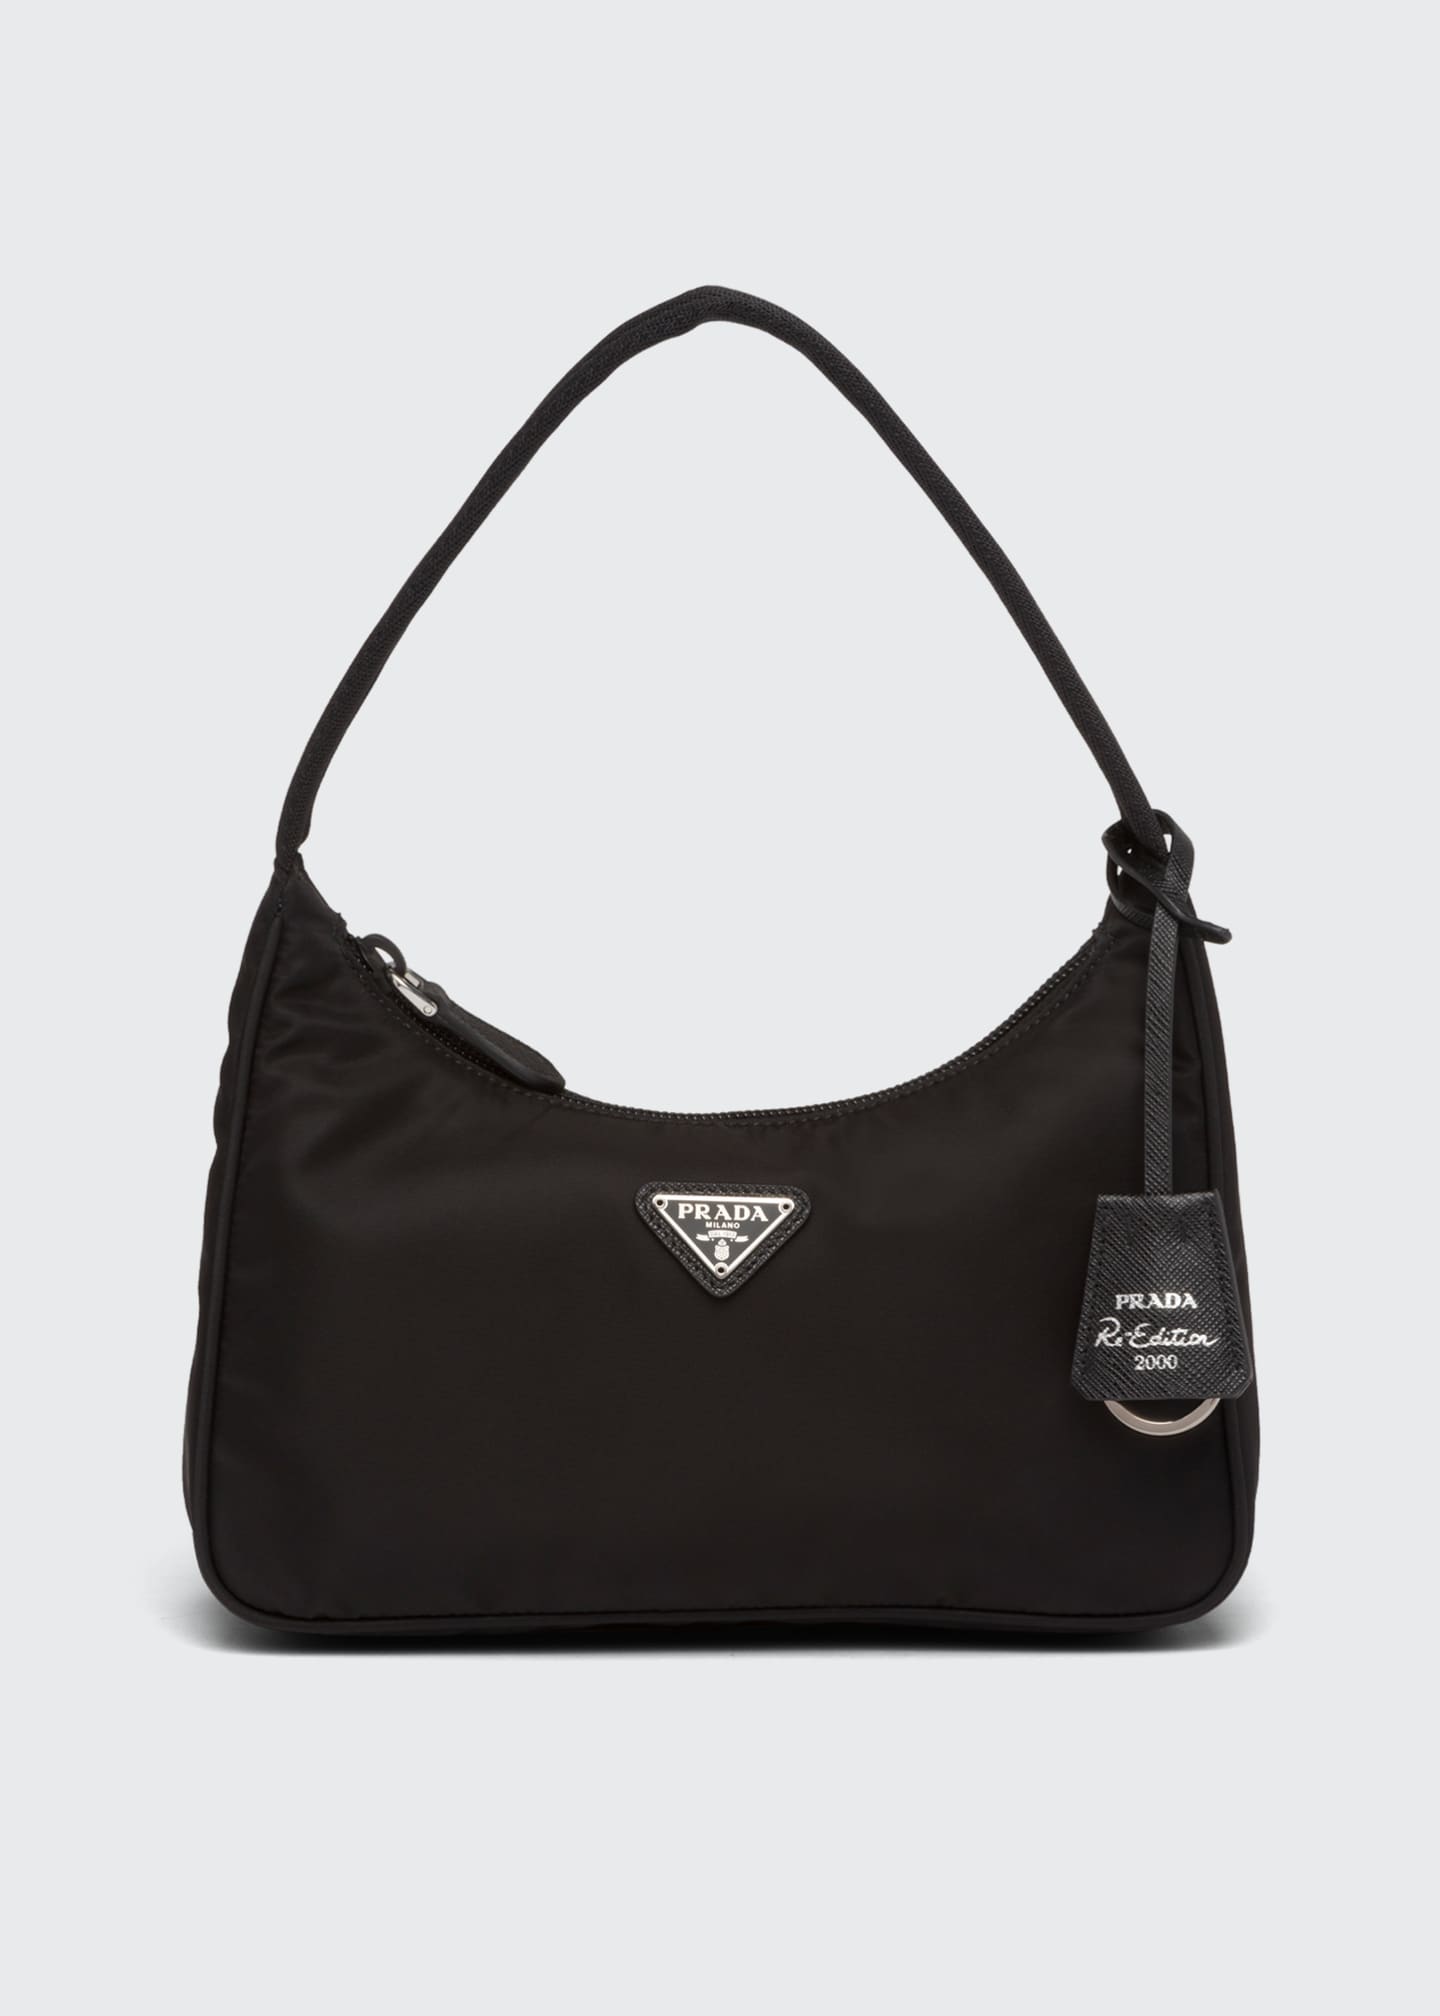 Shop 10 Mother's Day Gifts For The Mom Who Loves Designer Bags | Essence